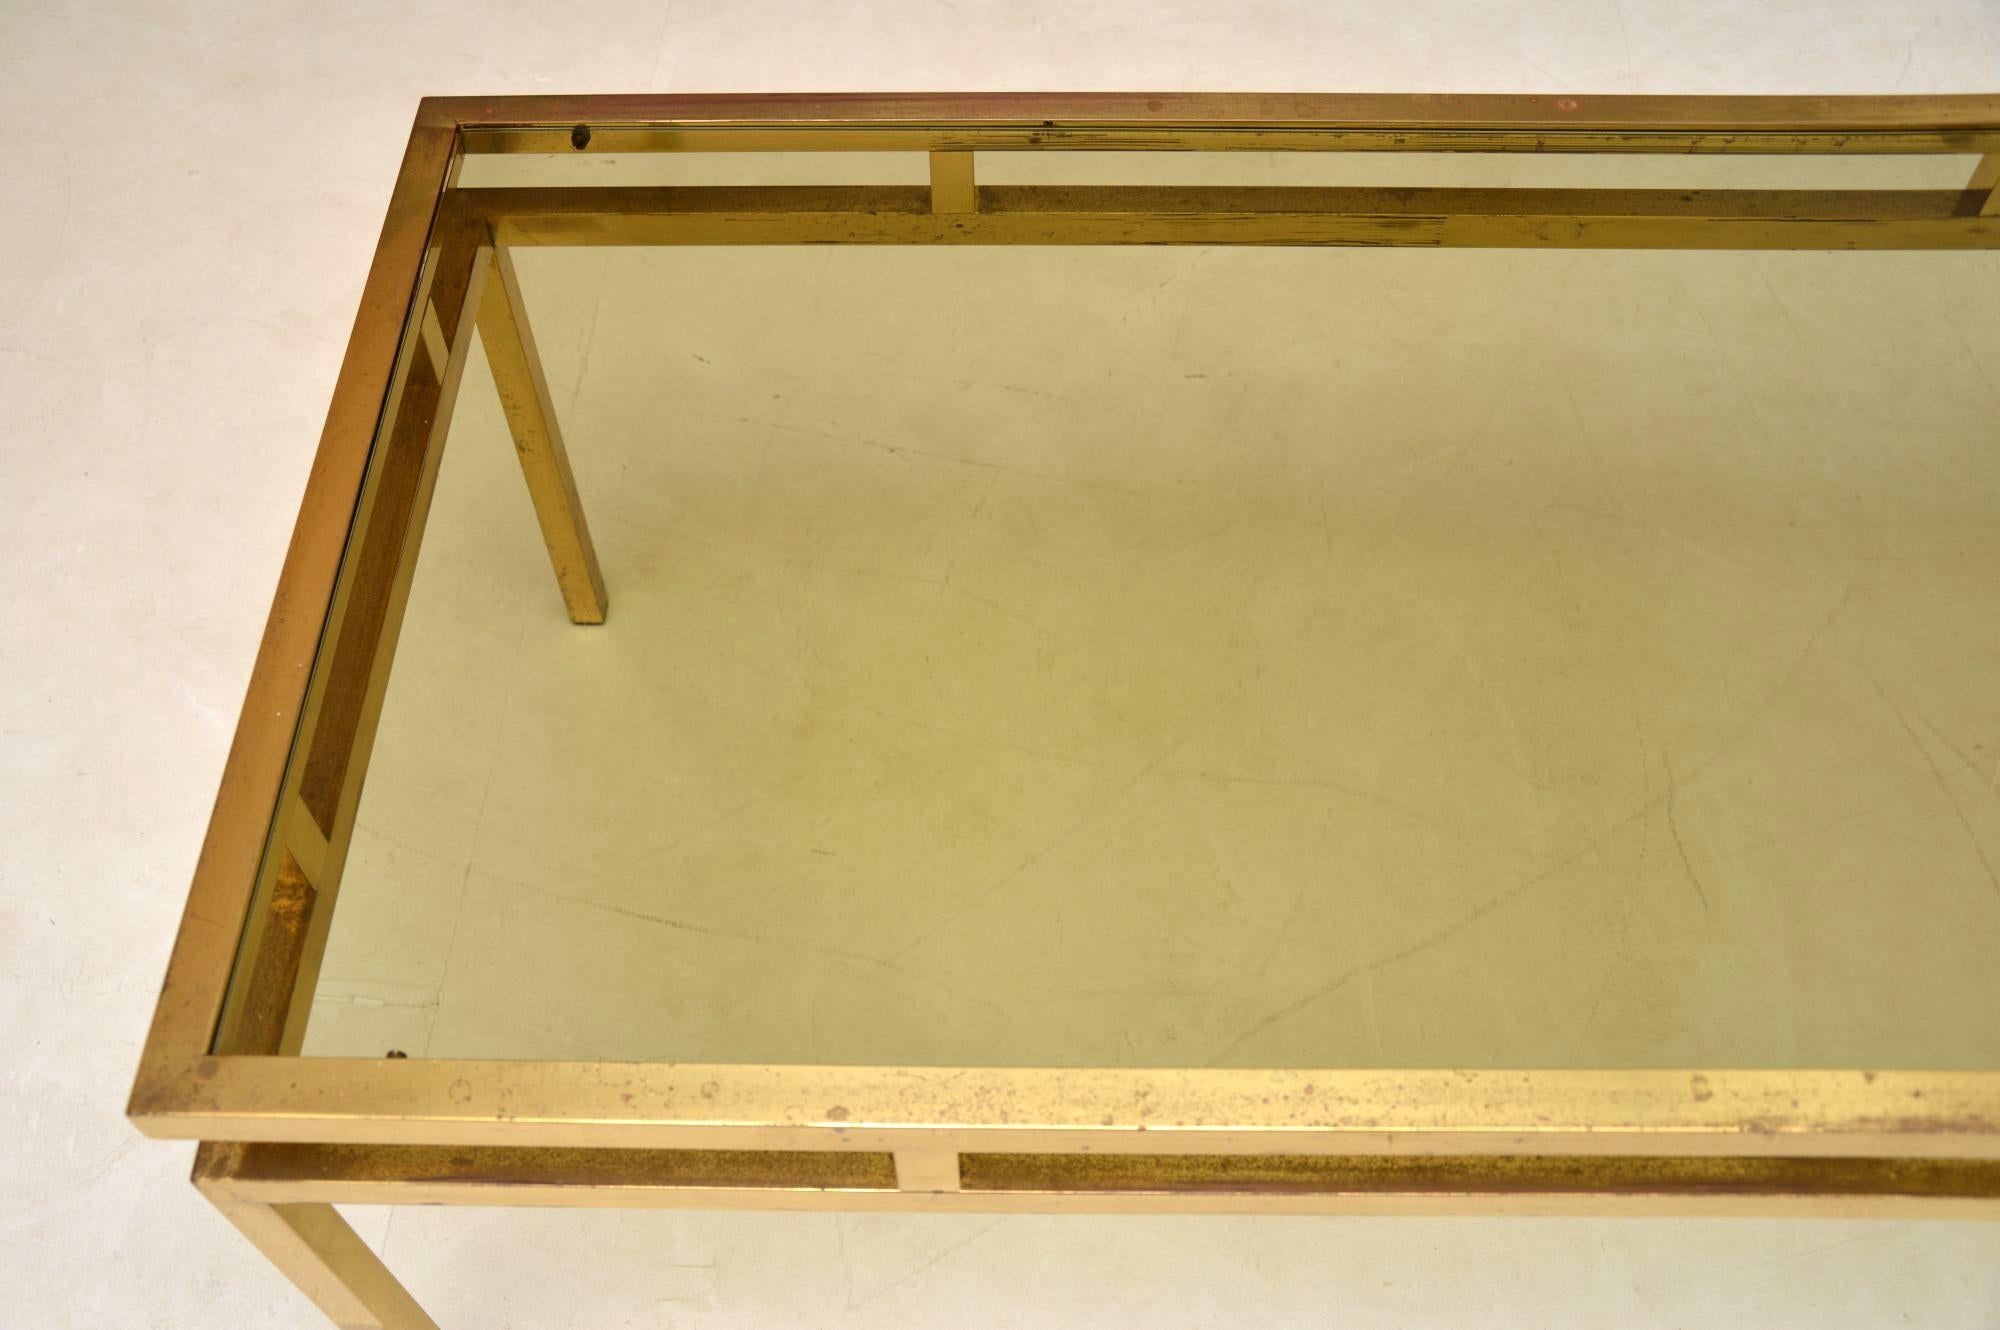 Mid-Century Modern 1960s Vintage French Brass and Glass Coffee Table